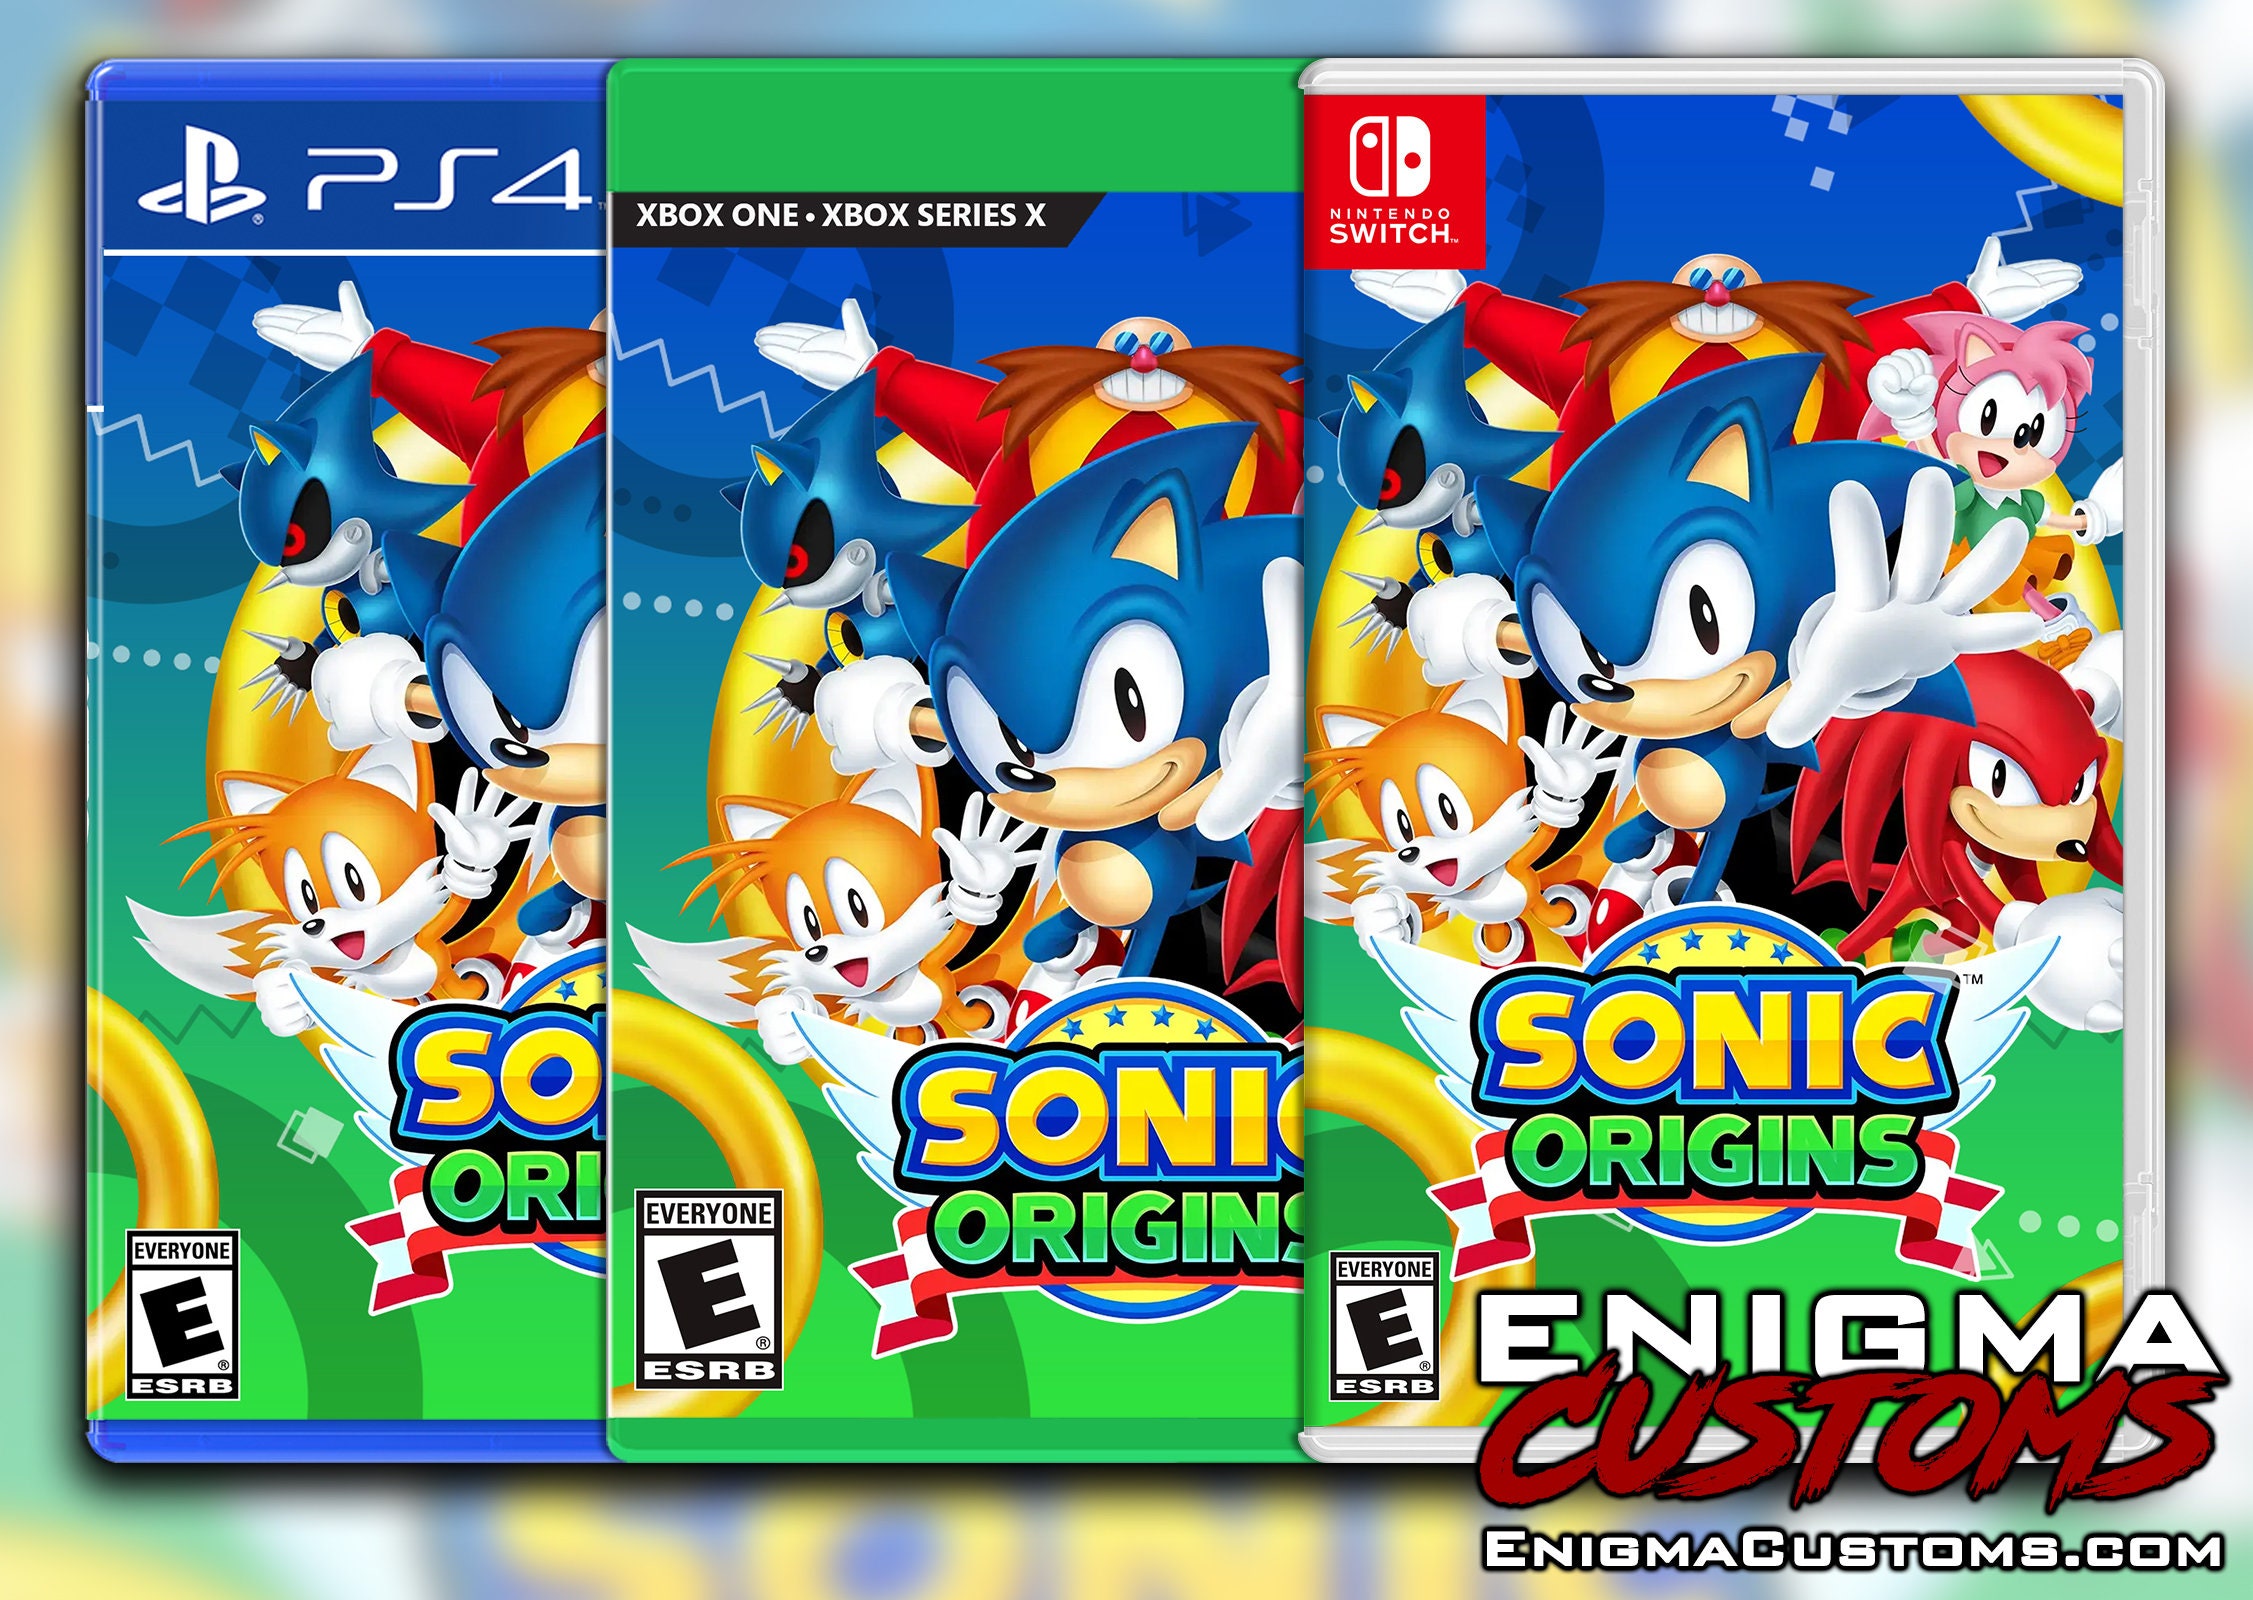 Which games are included in Sonic Origins? Release date, platforms